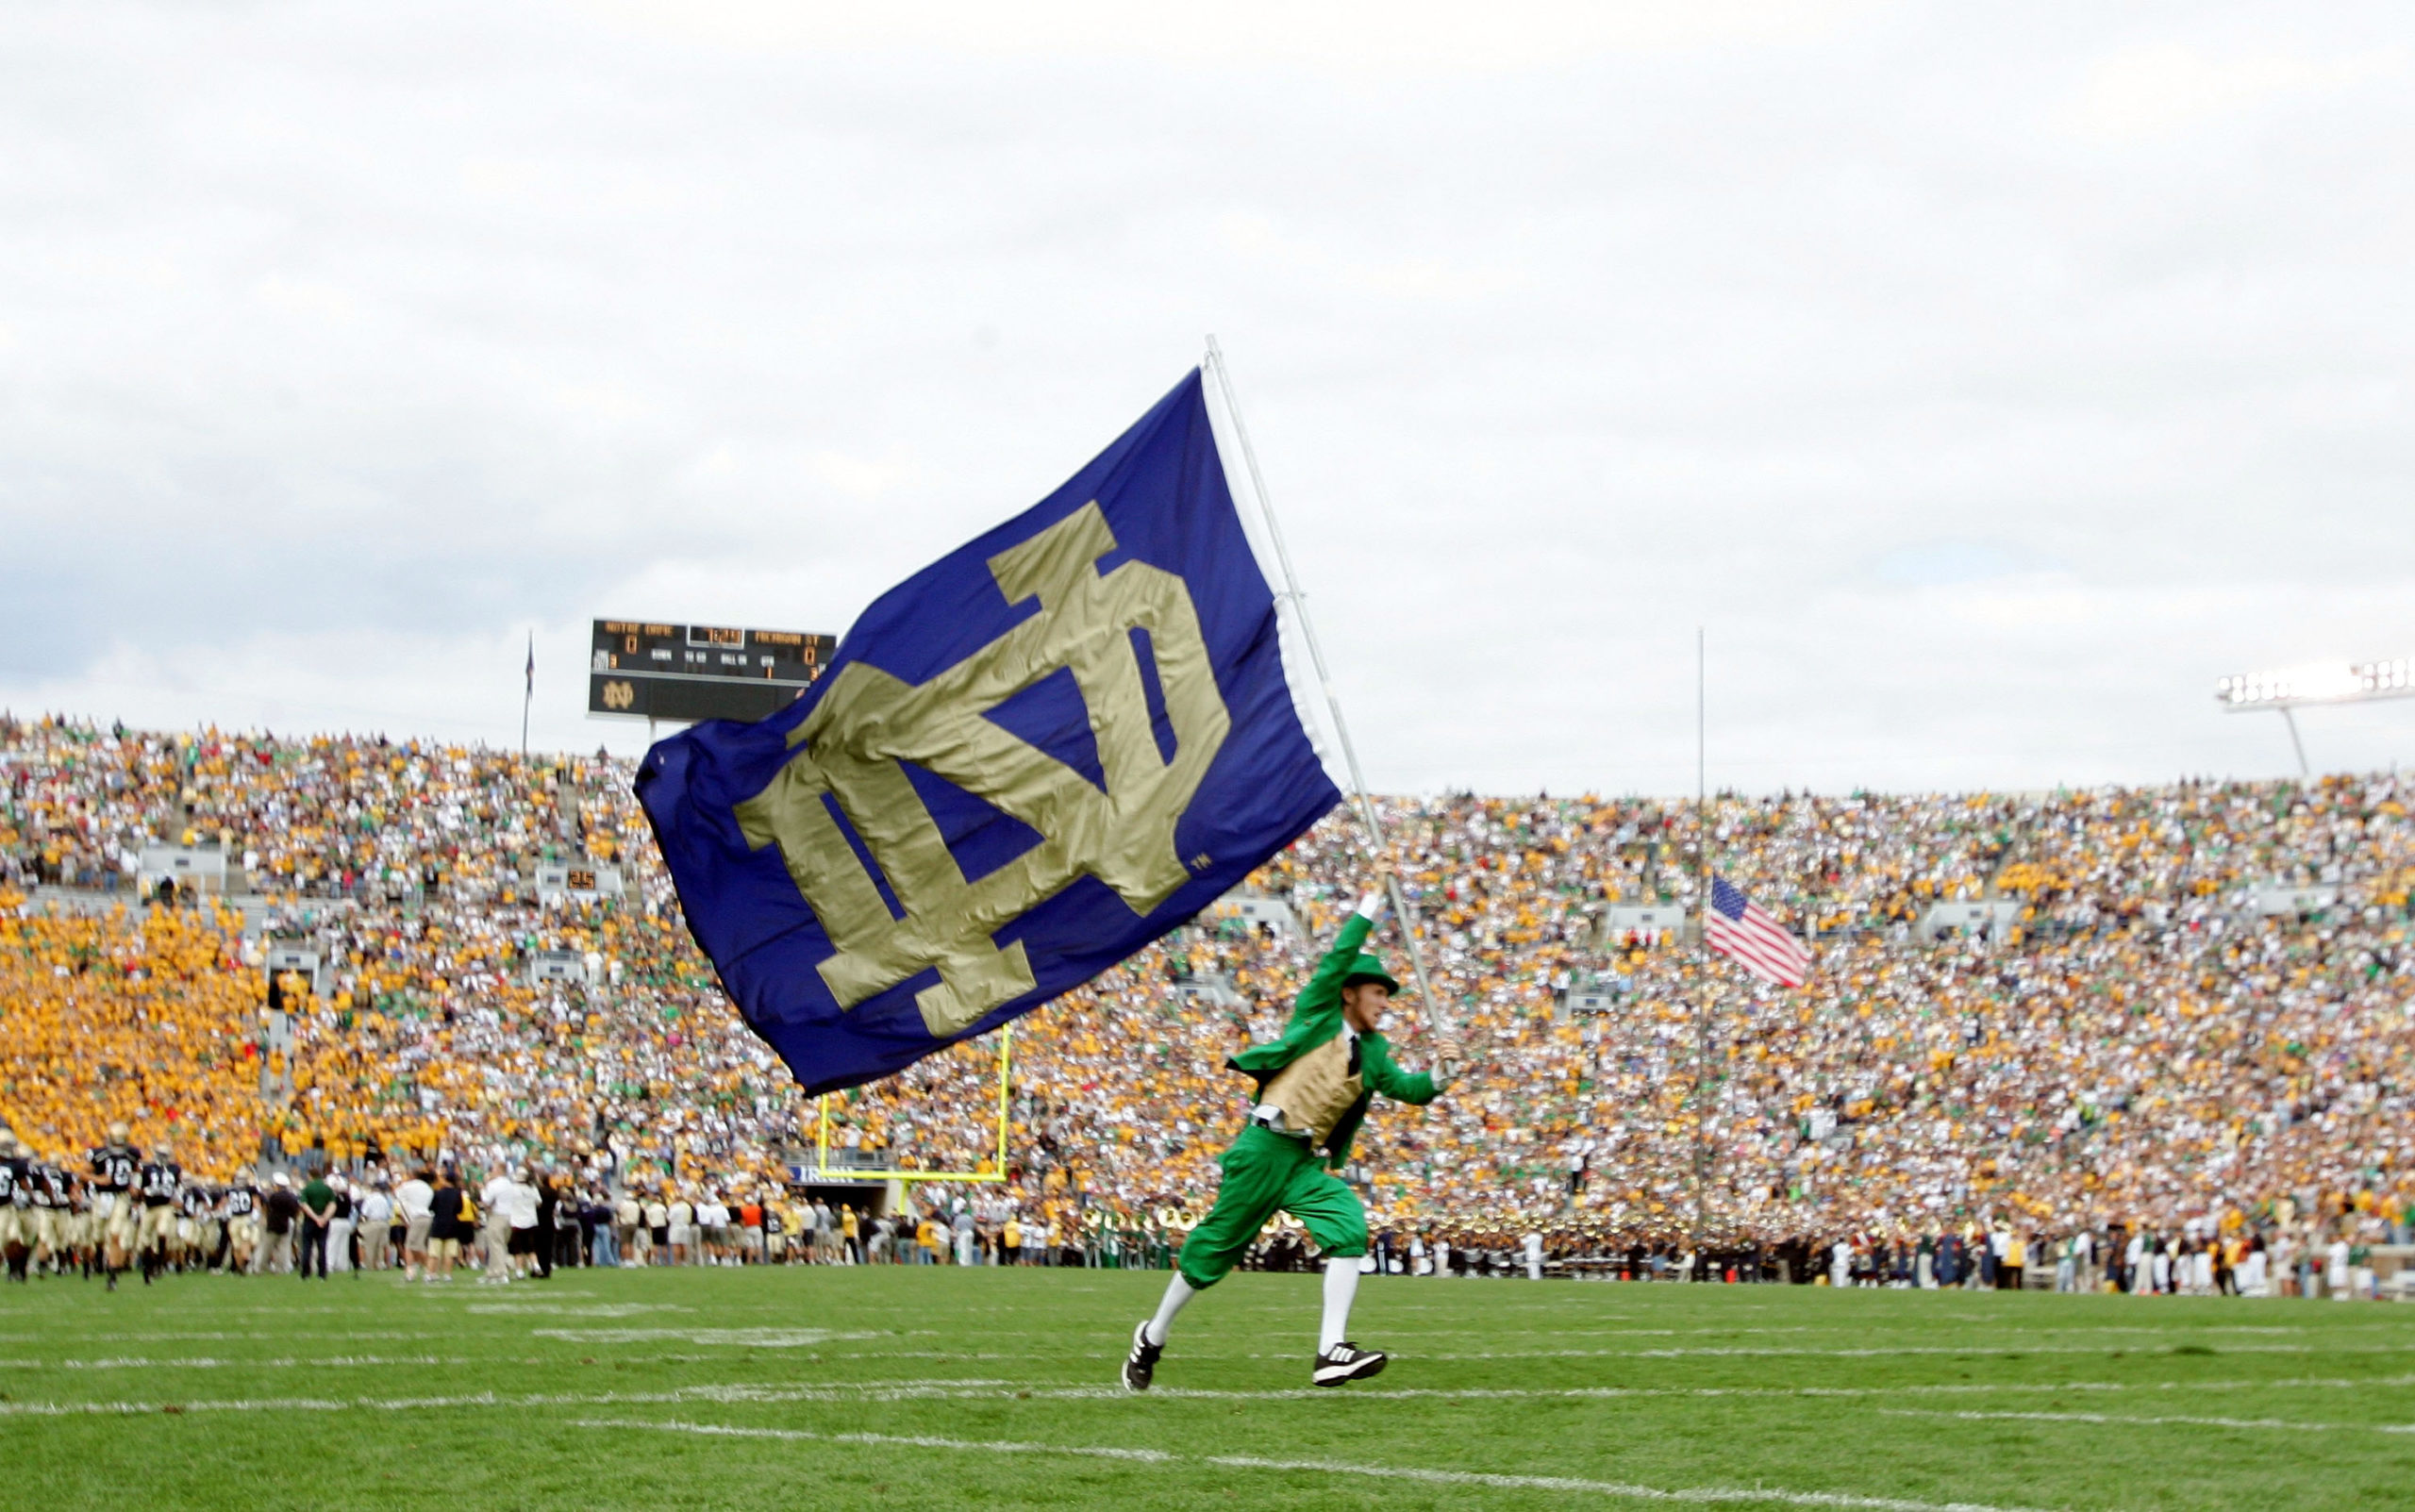 University of Notre Dame Distances From Lou Holtz’s ‘Catholics in Name